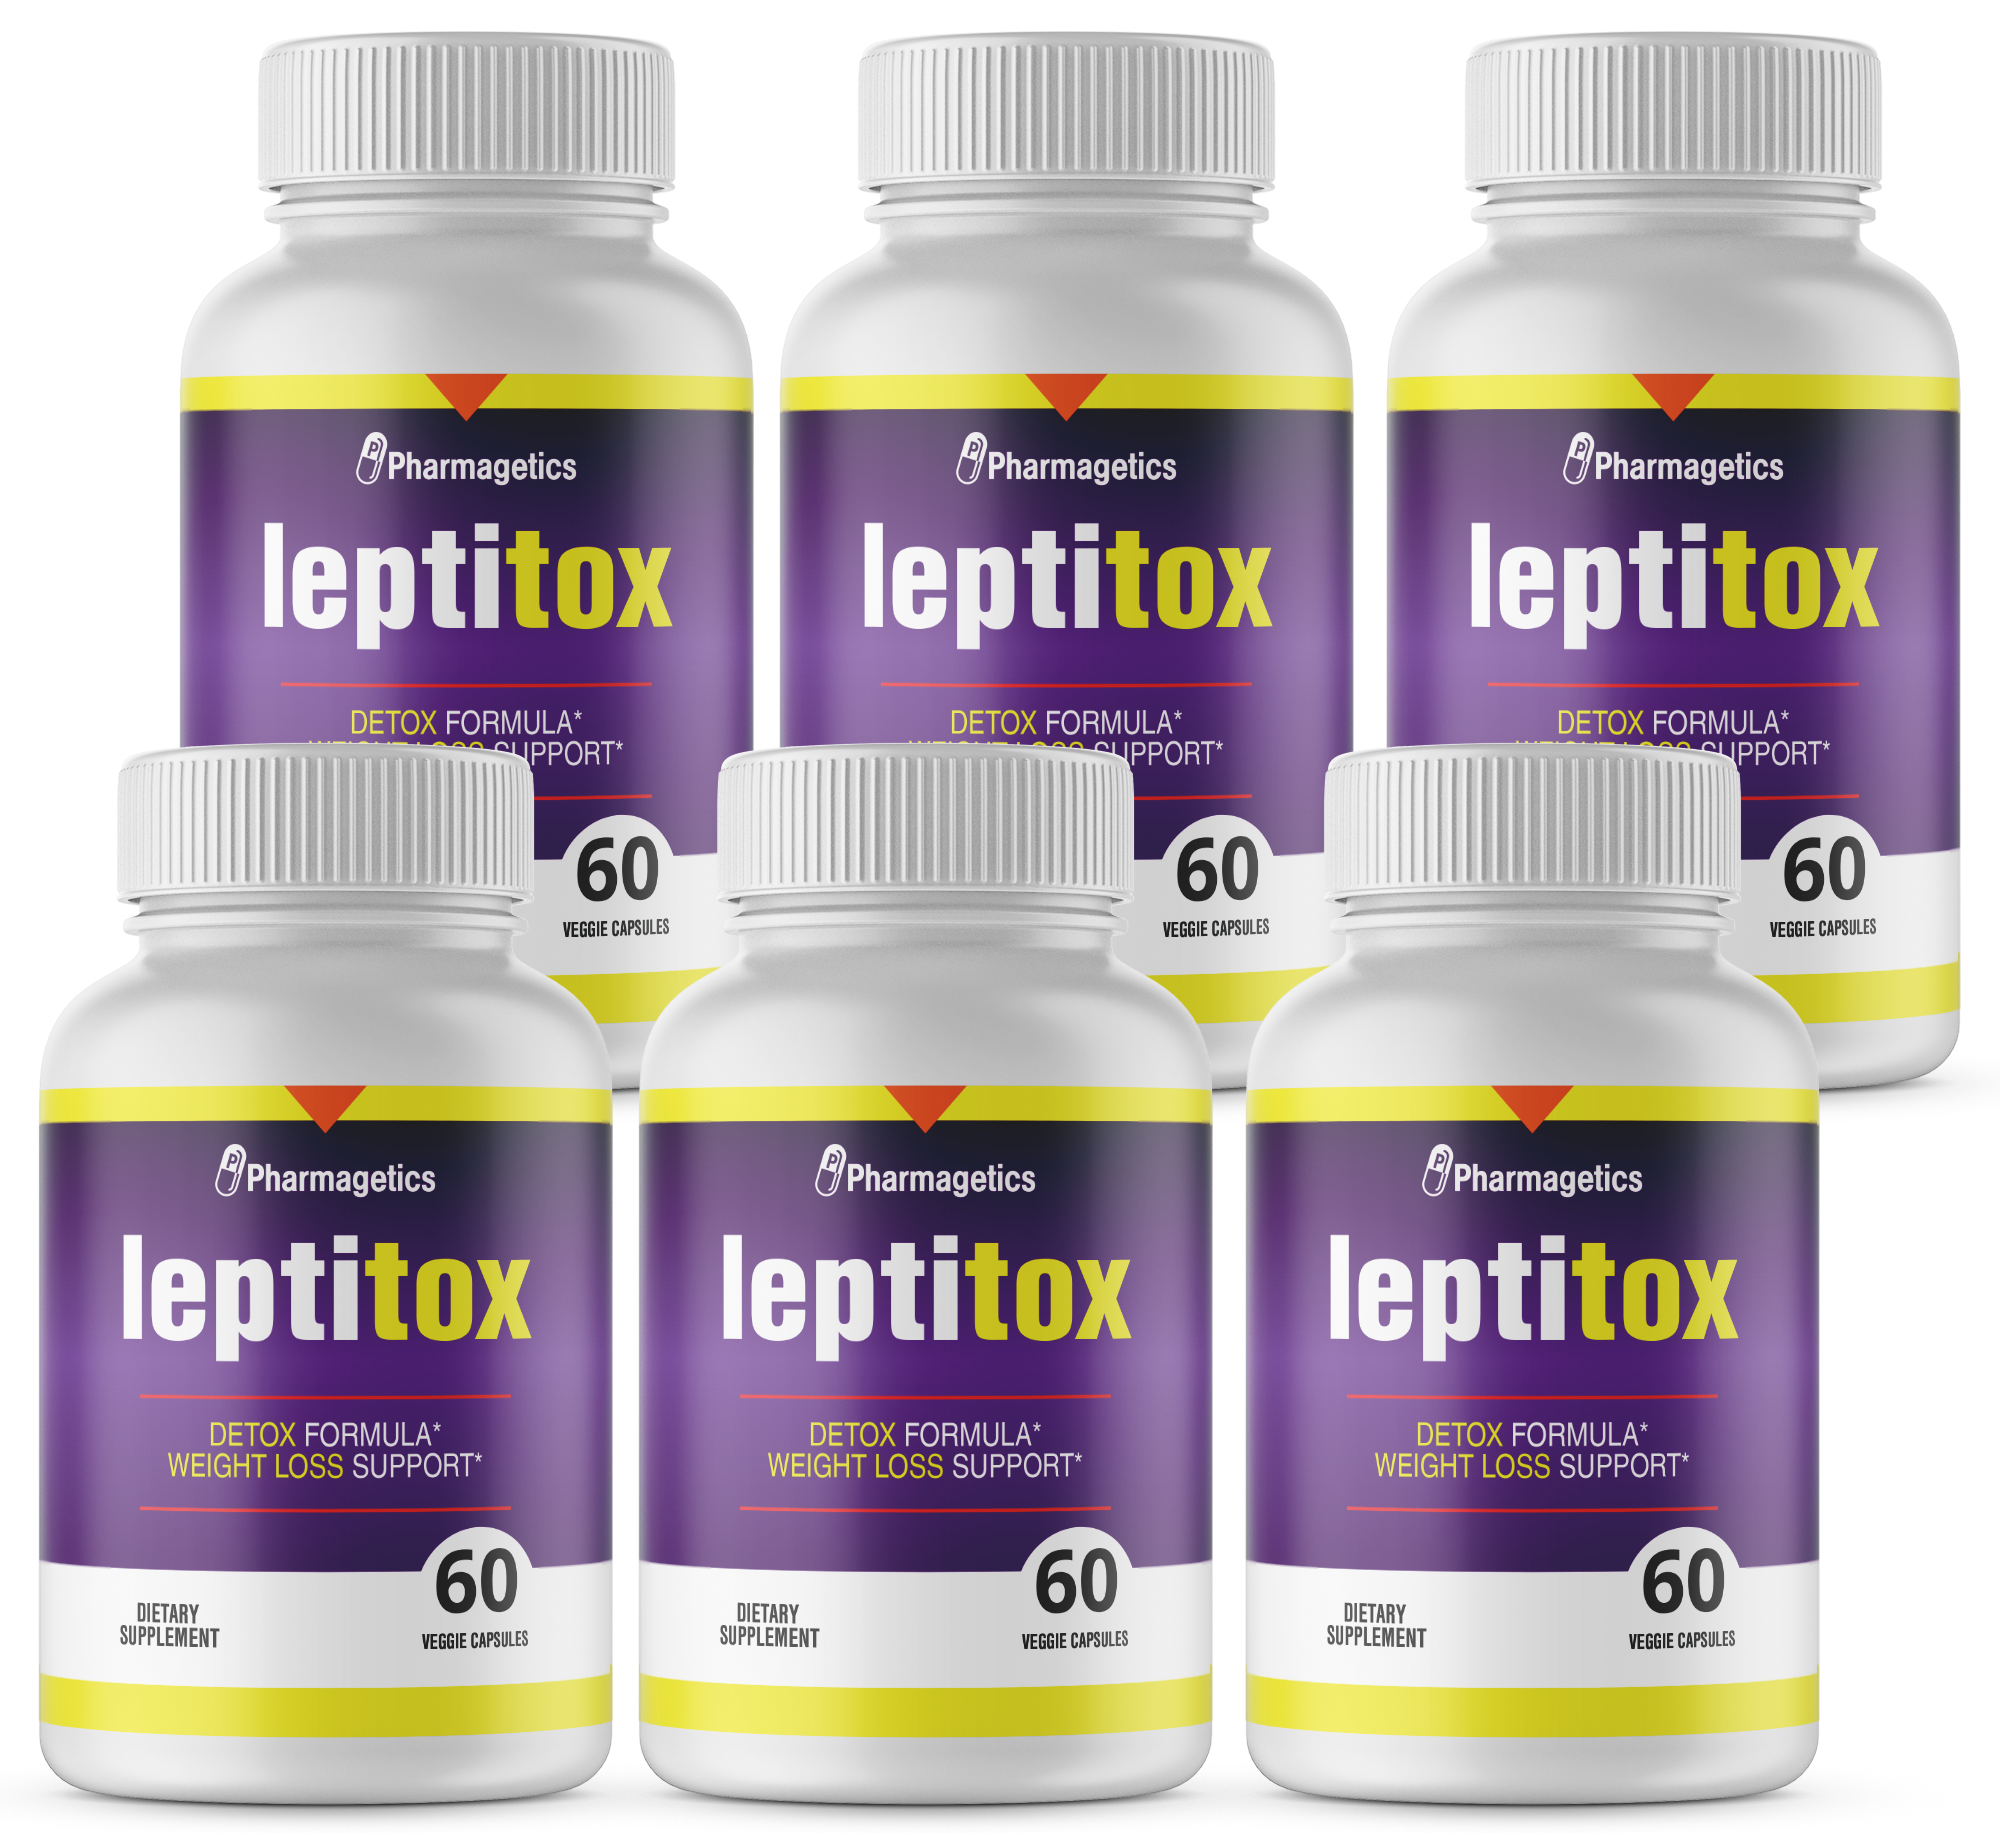 Leptitox Detox Formula  Weight Loss Support 60 Capsules - 6 Bottles